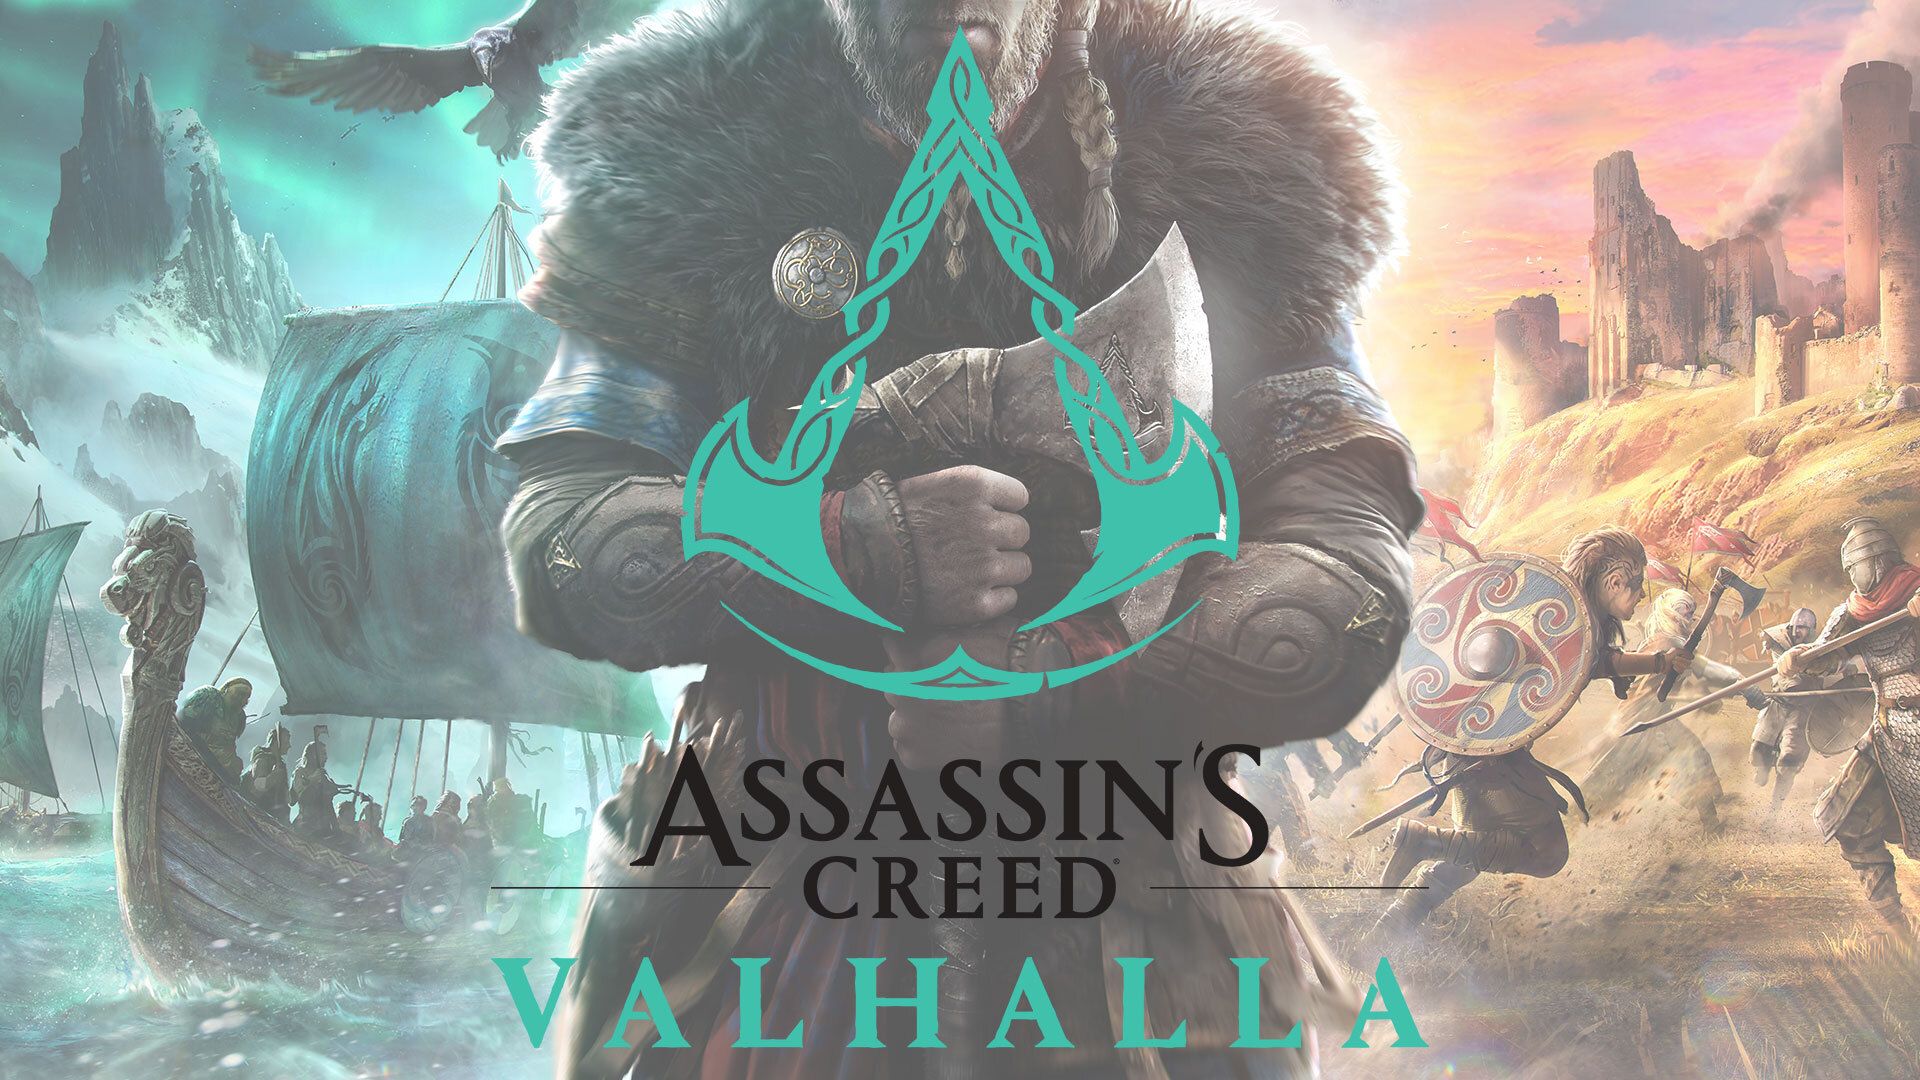 Assassin's Creed Valhalla reveal trailer: How to watch first look